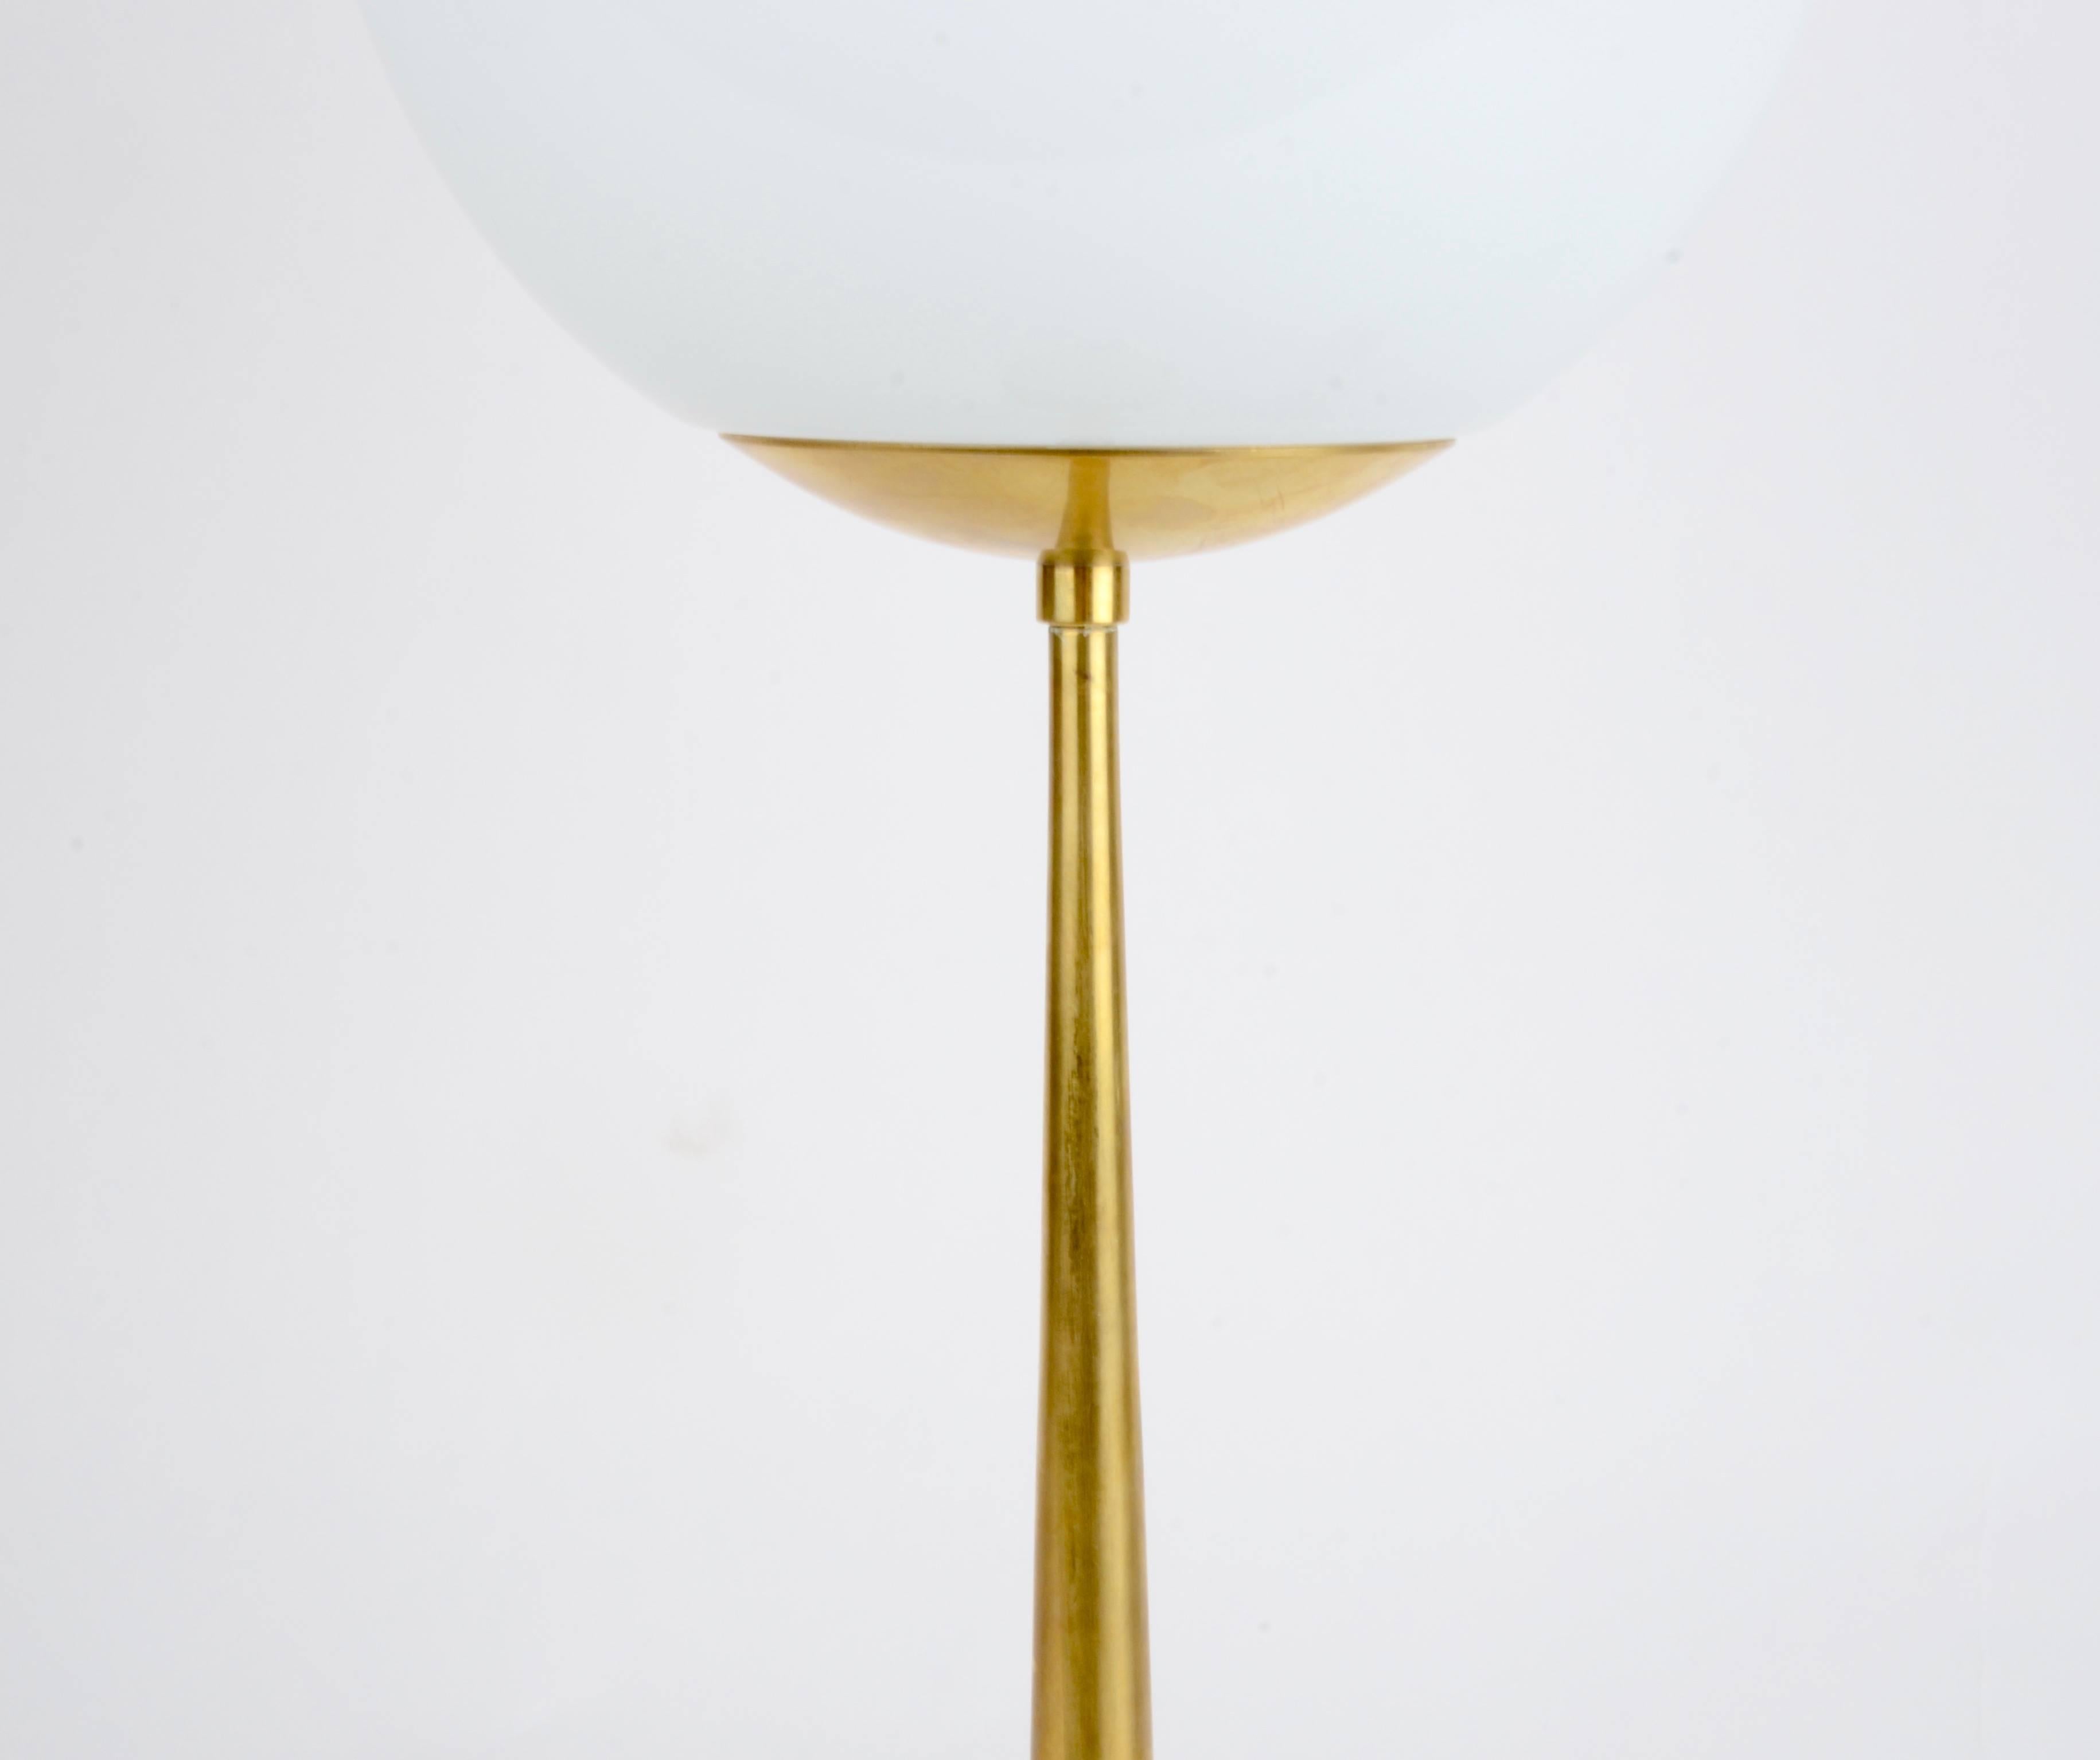 A table lamp in brass with glass shade designed by Hans-Agne Jakobsson, Markaryd, Sweden, mid-1900s.